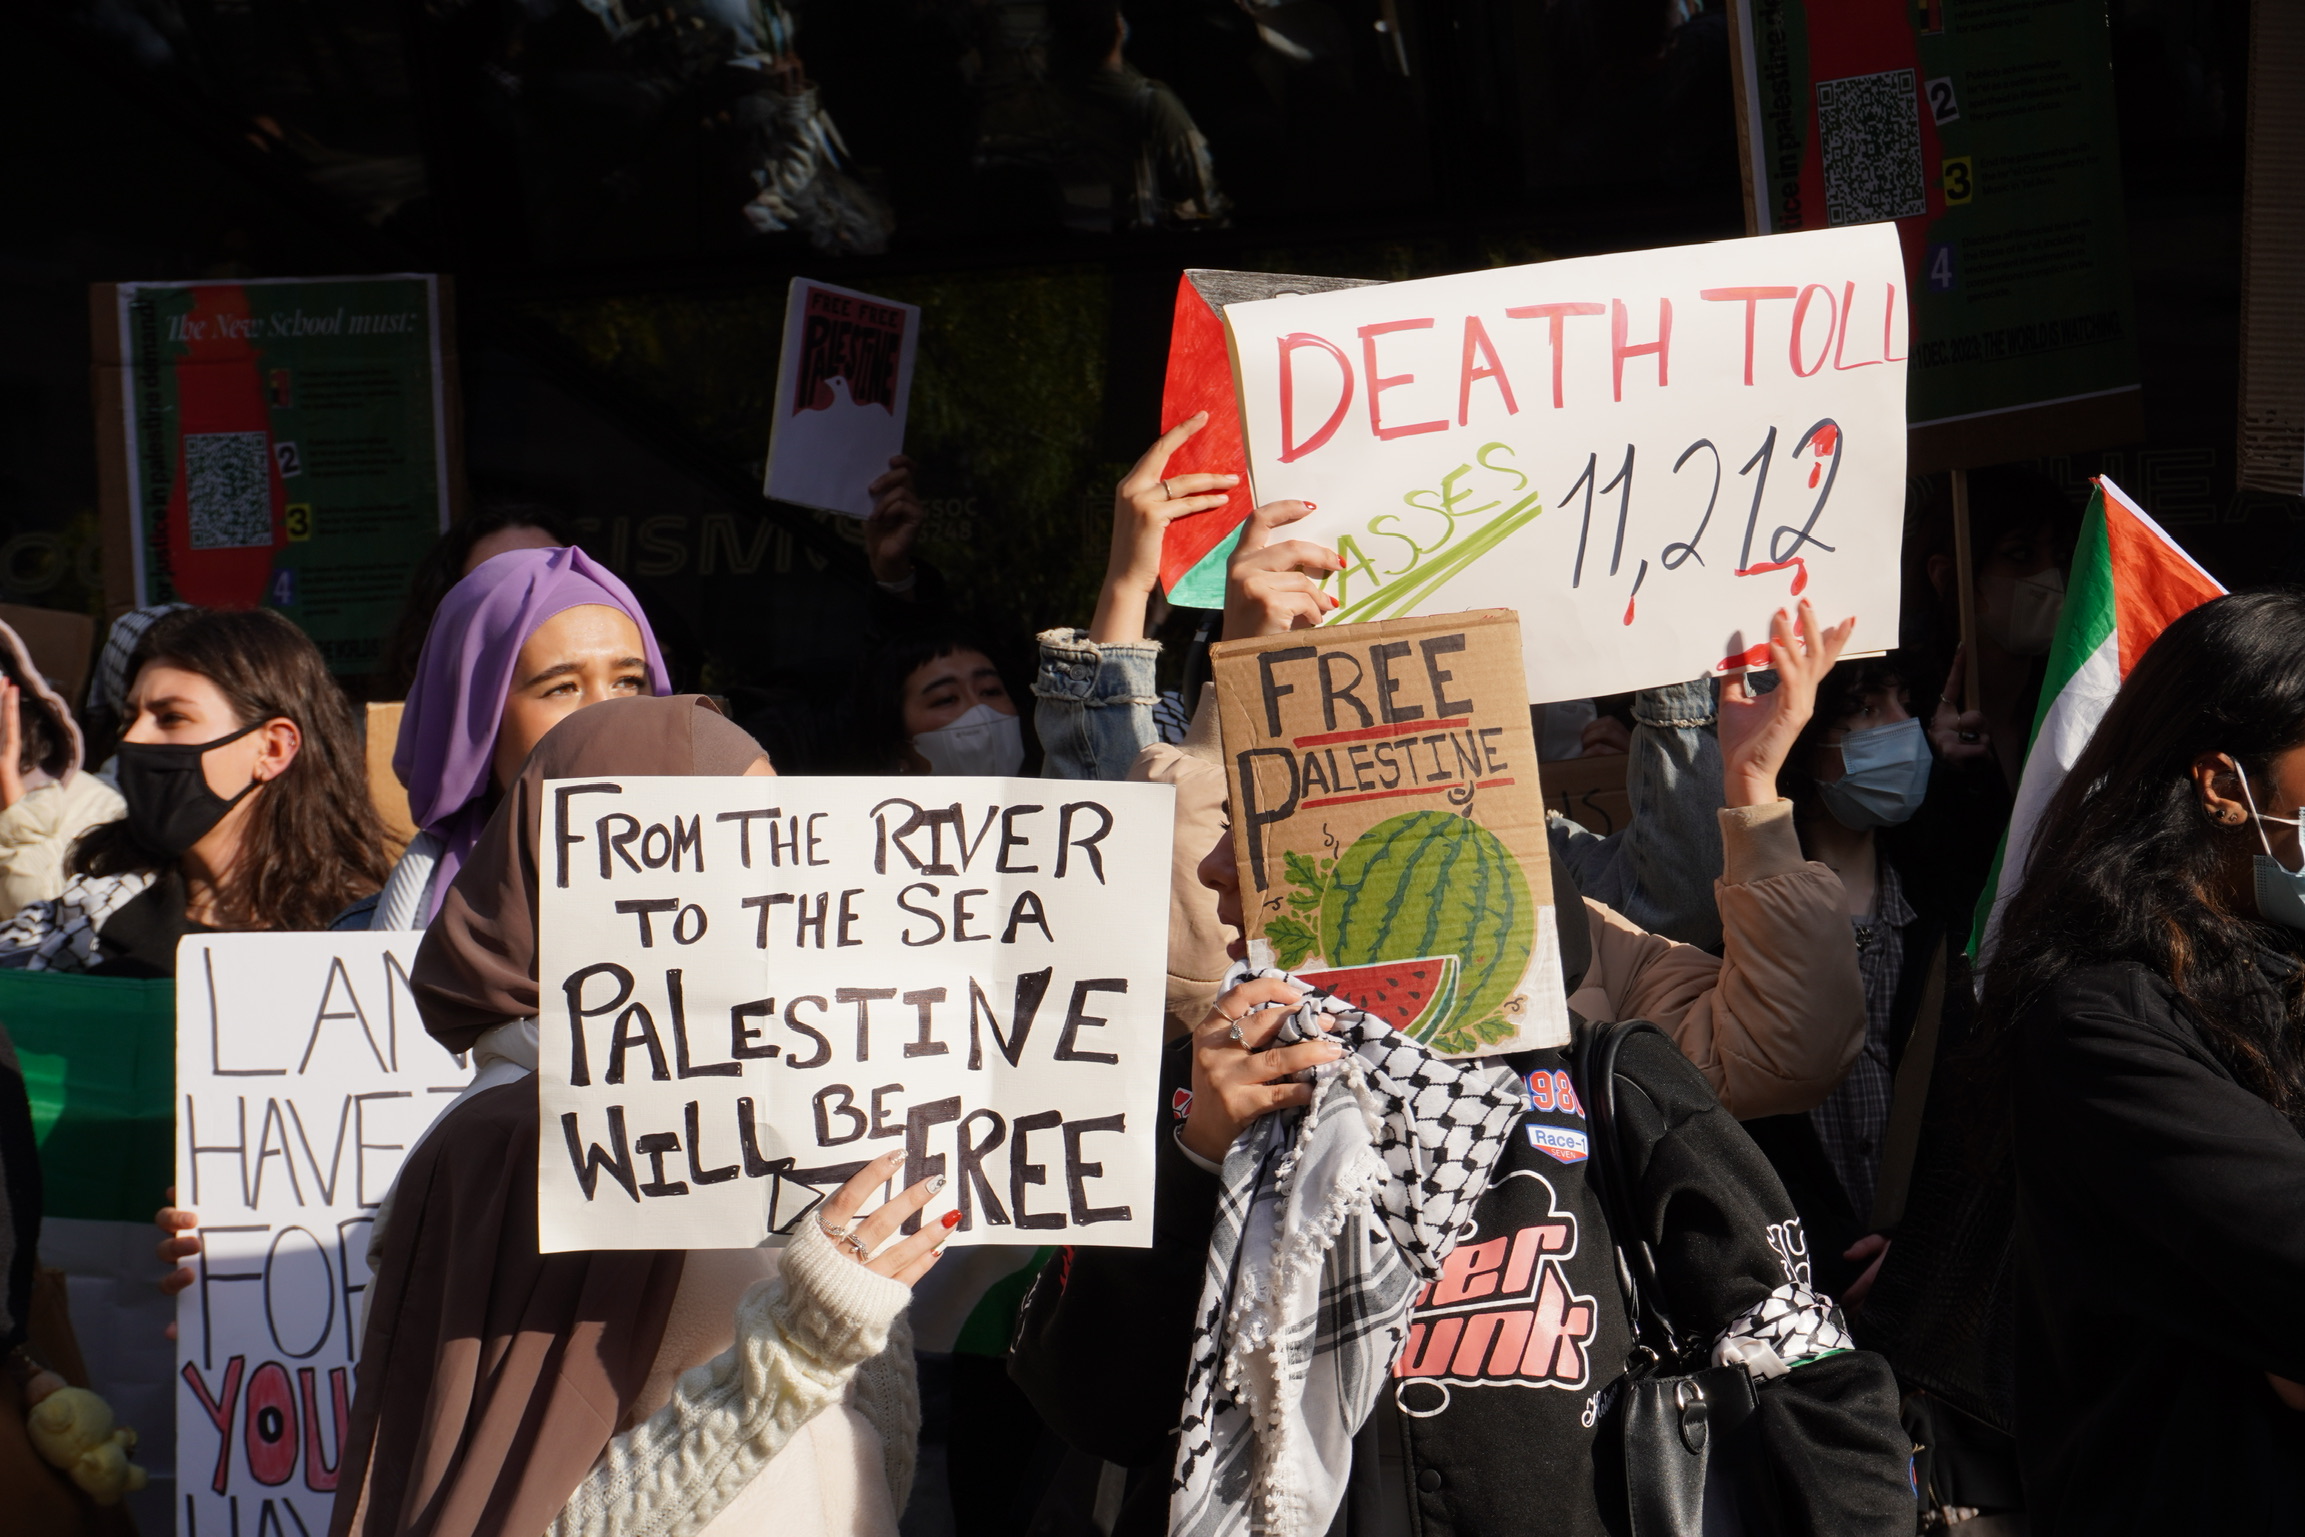 New School community members pictured at the walkout outside of the University Center at 63 Fifth Ave, holding up multiple signs that read “From the river to the sea Palestine will be free,” “Death toll passes 11,212,” and “Free Palestine.”